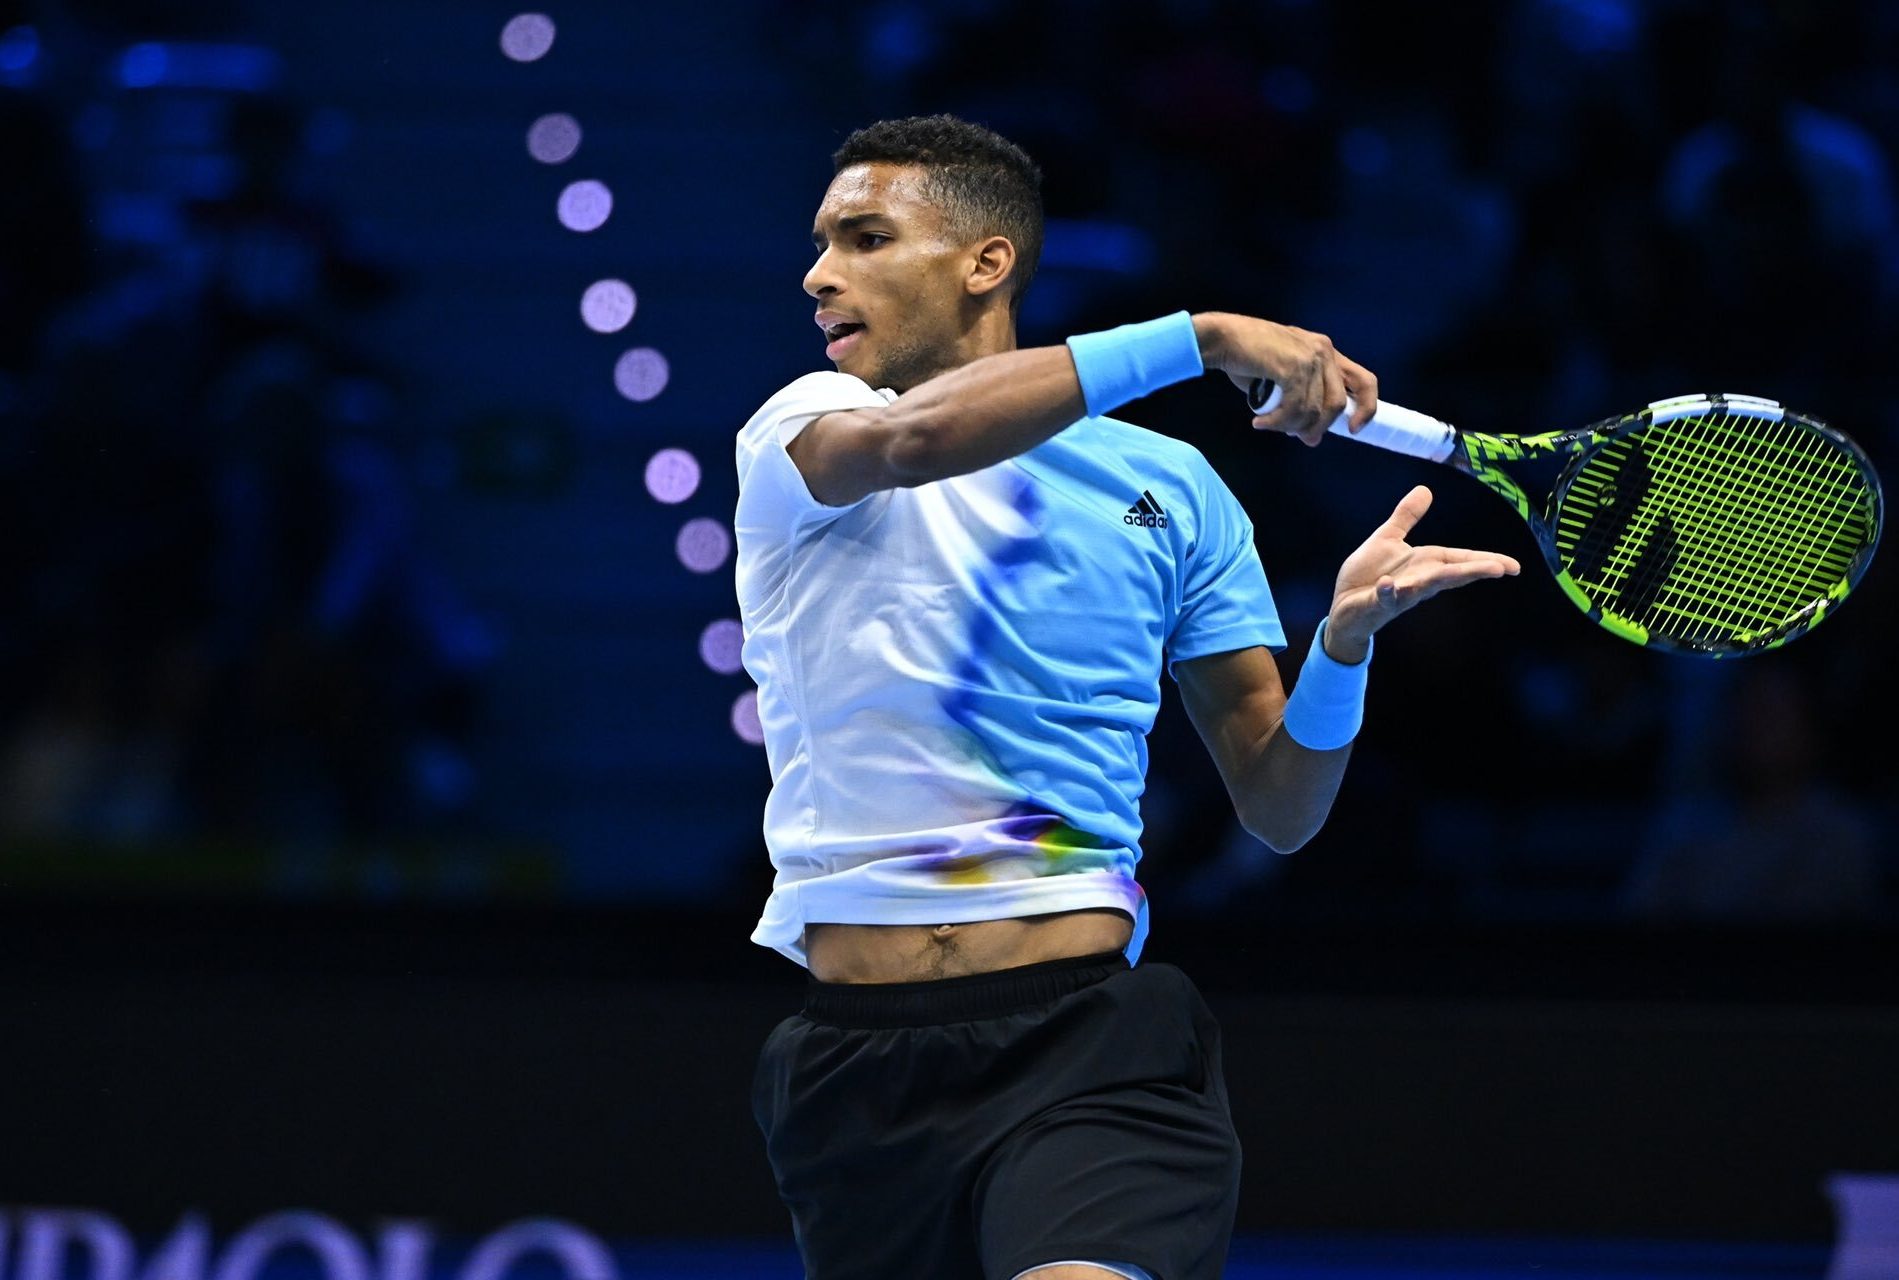 Auger-Aliassime overpowers Nadal for first win at ATP Finals